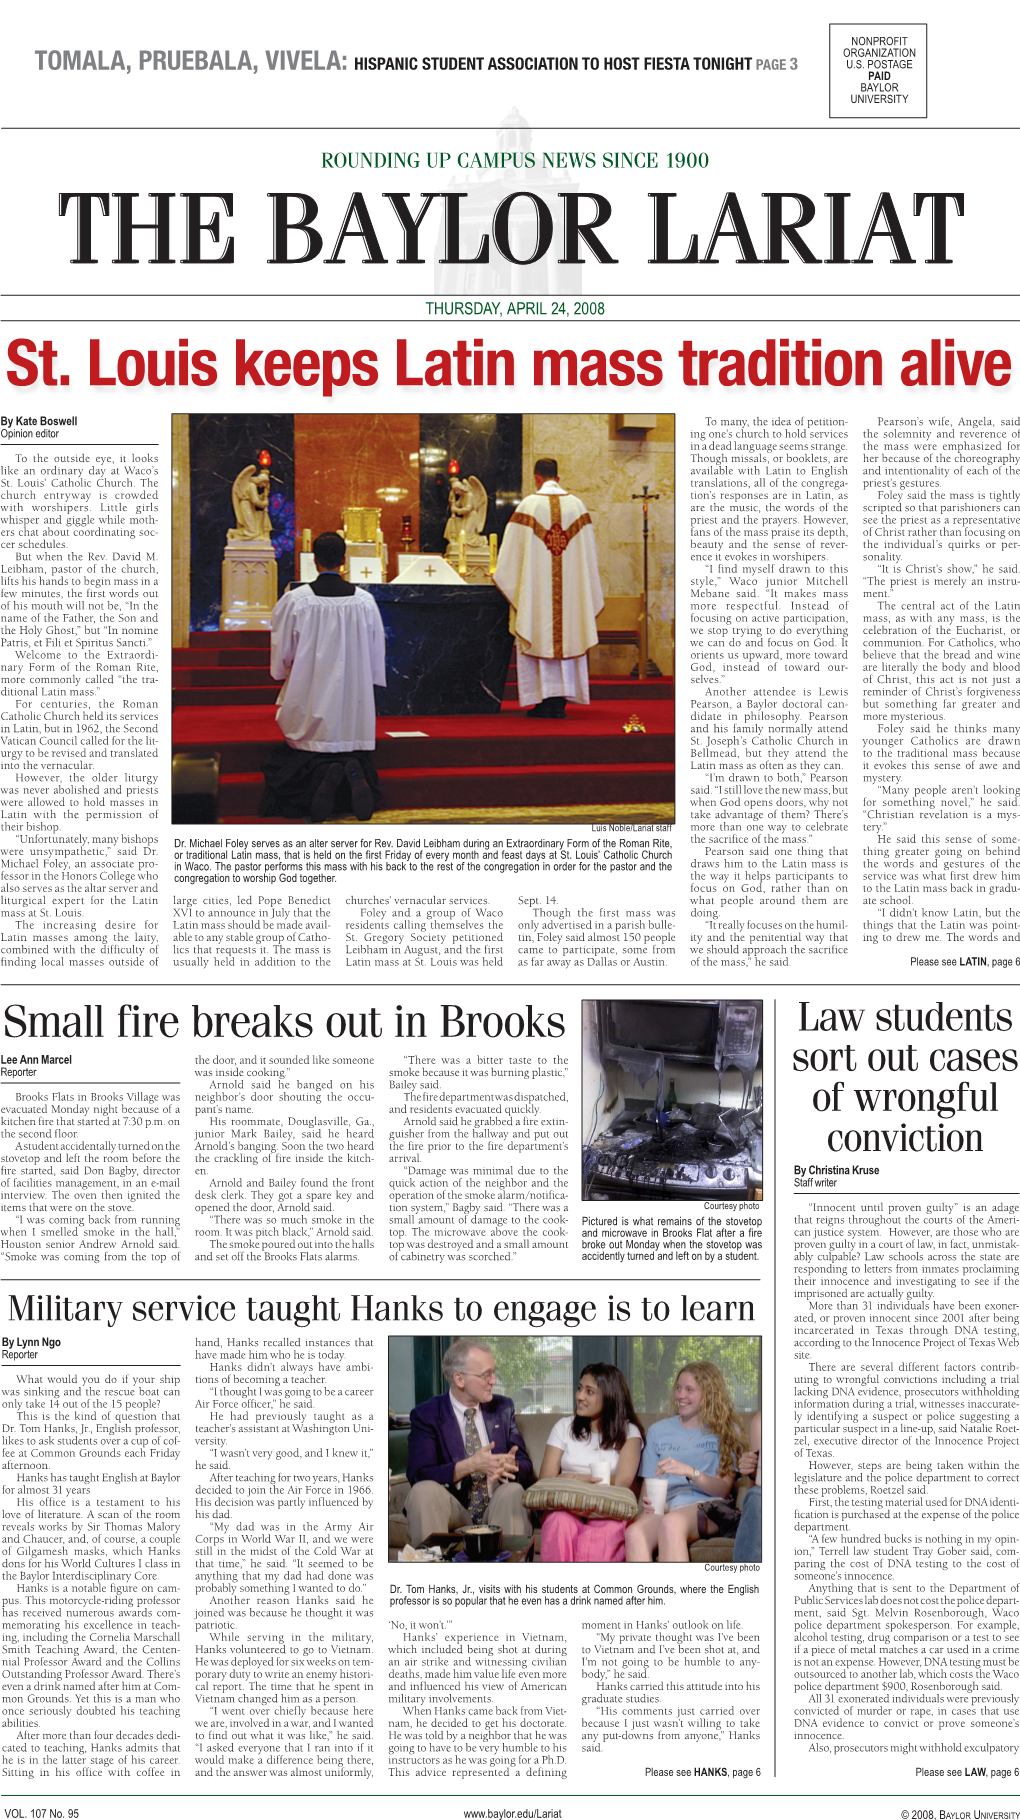 St. Louis Keeps Latin Mass Tradition Alive